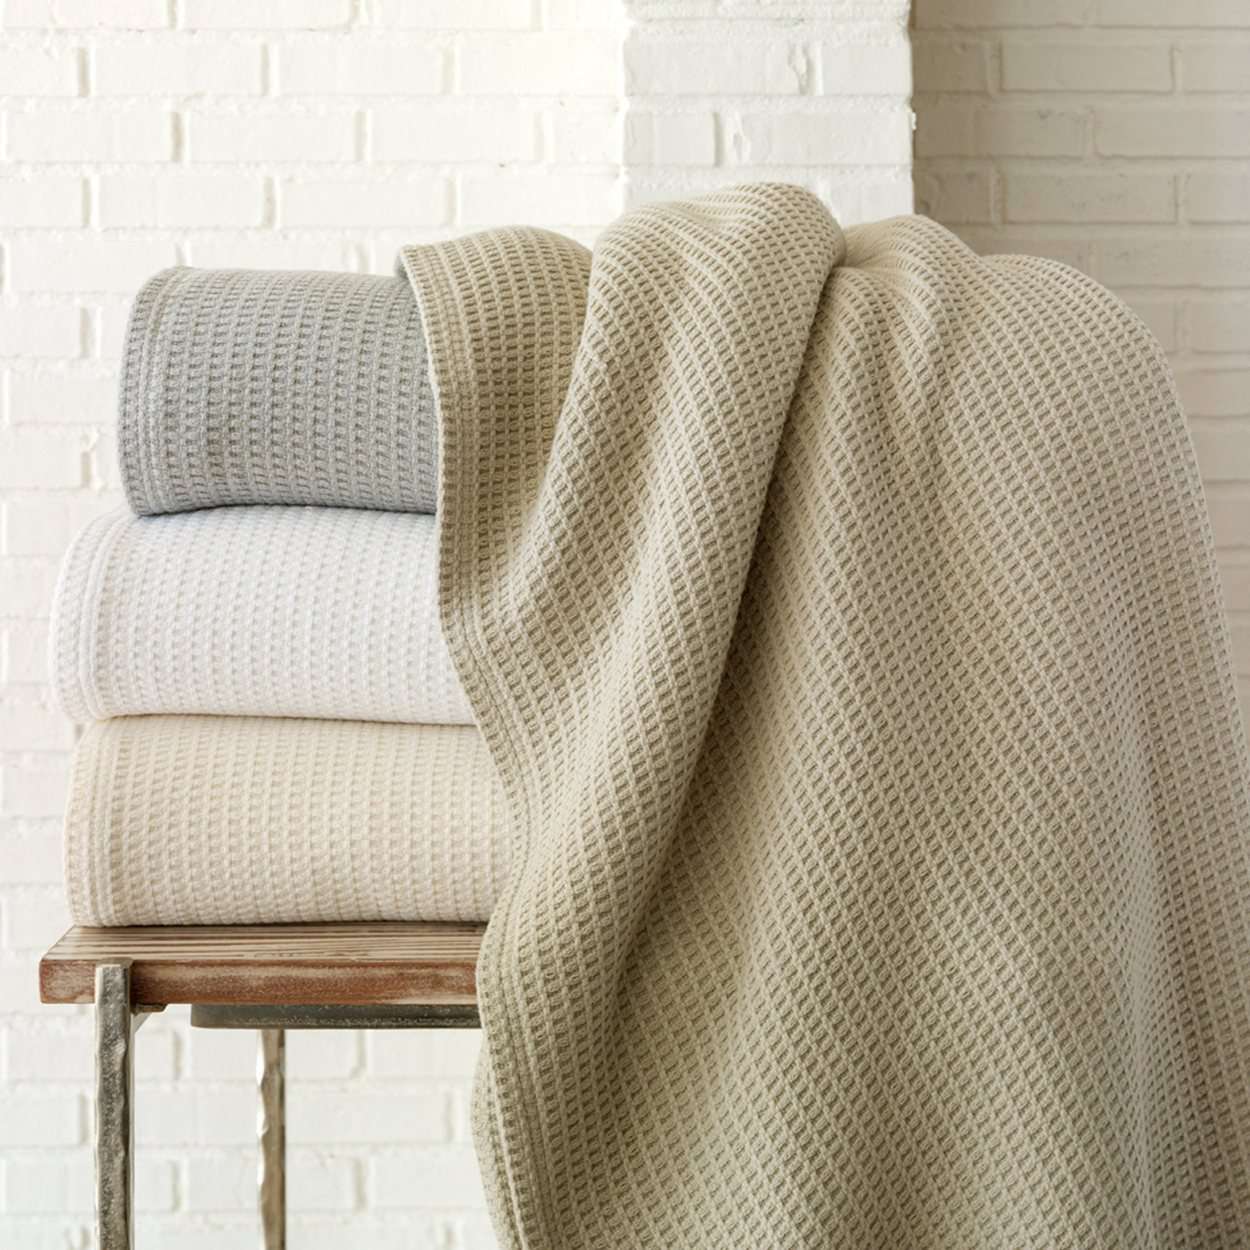 Riviera Blanket by Peacock Alley